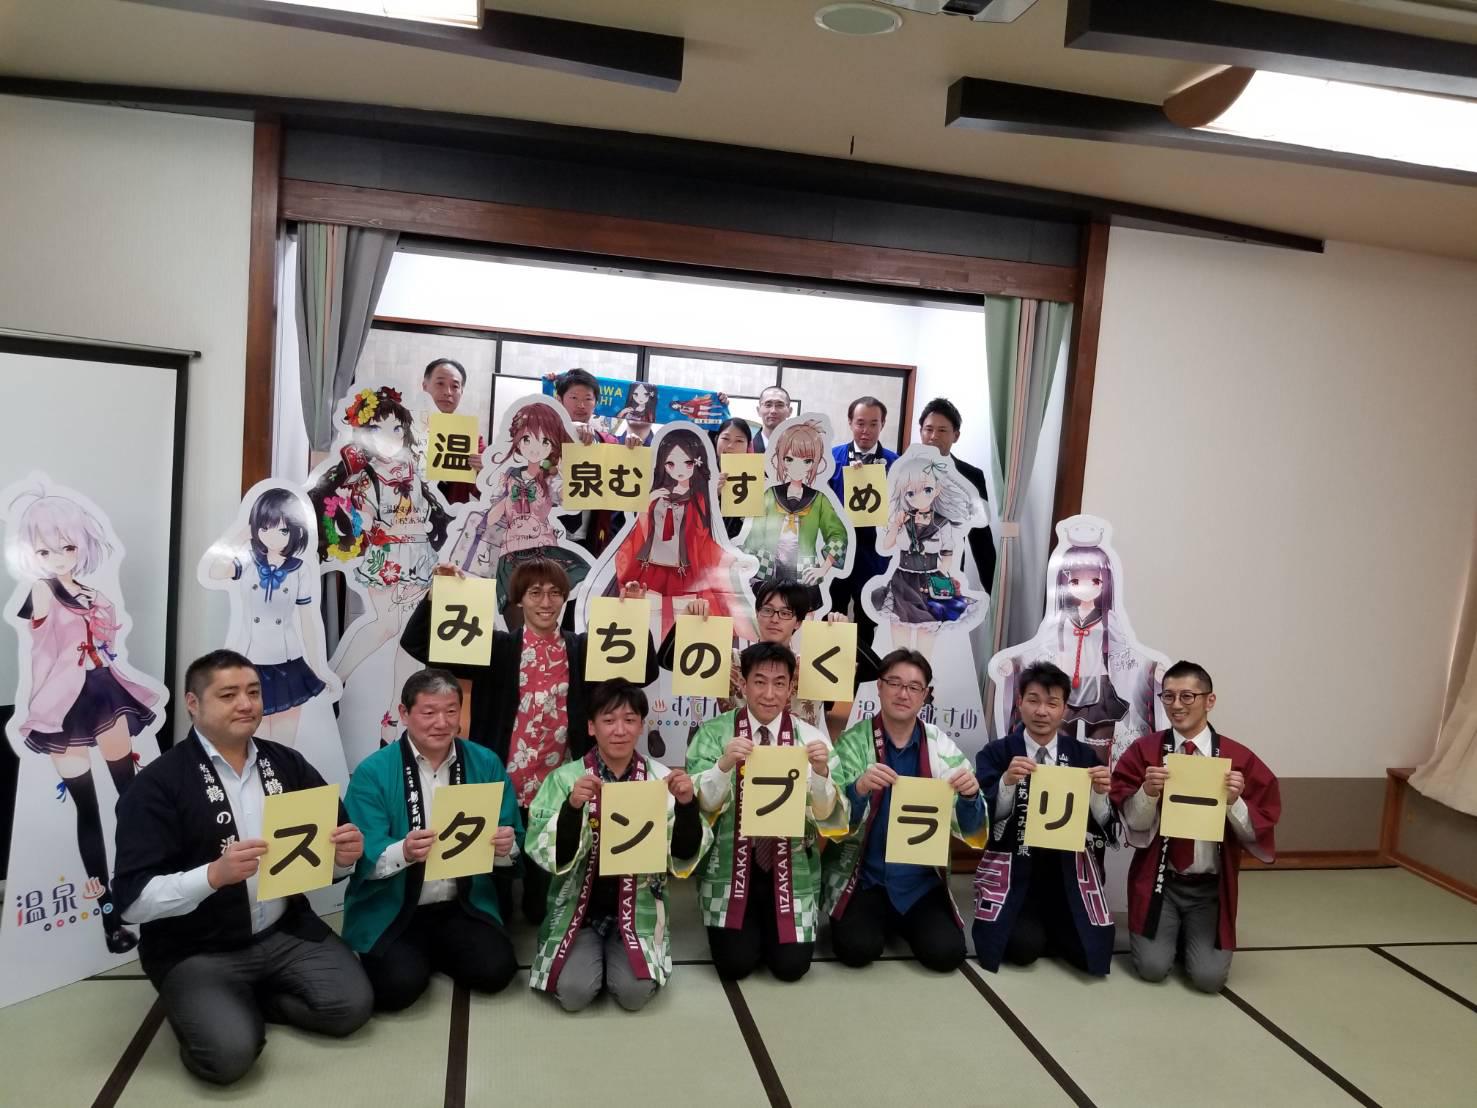 Onsen Musume Stamp Rally (December 1, 2019 - February 29, 2020)